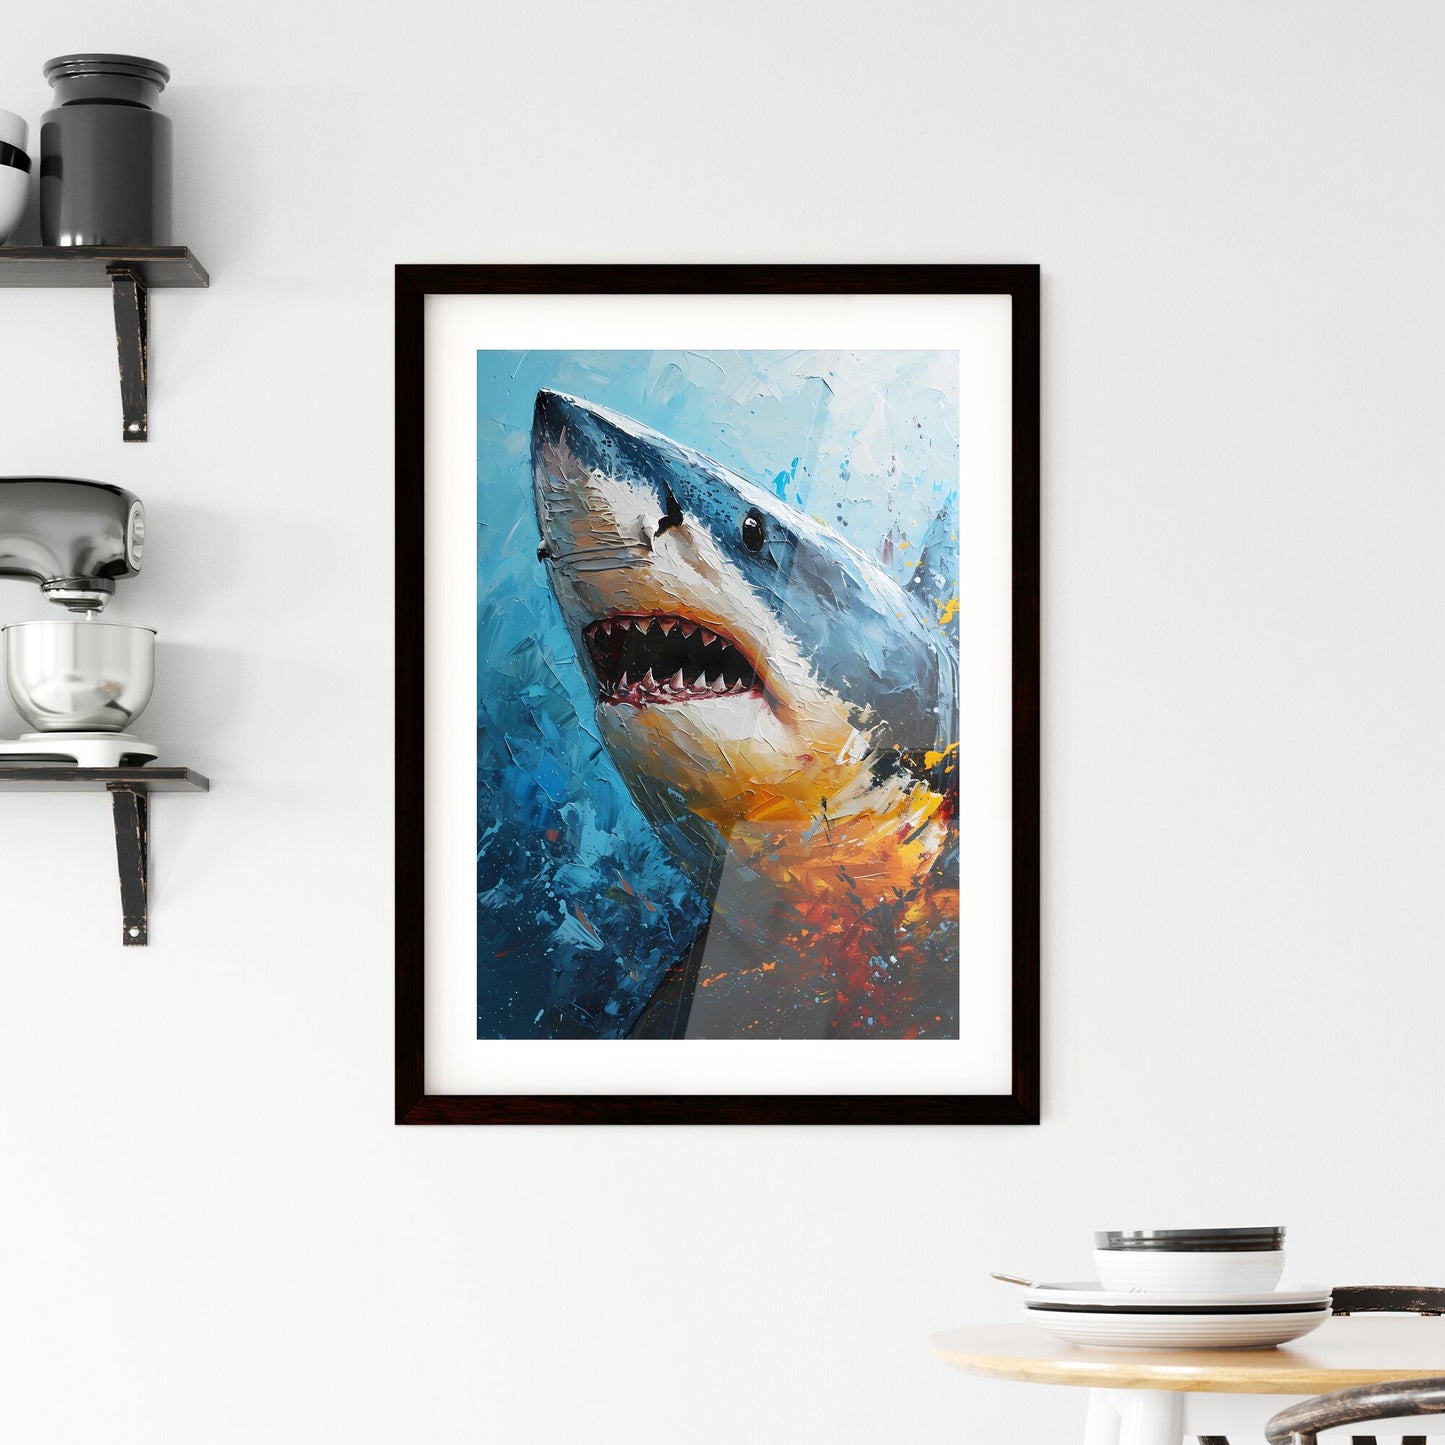 A Poster of The Shark Portrait with colorful Background - A Painting Of A Shark Default Title